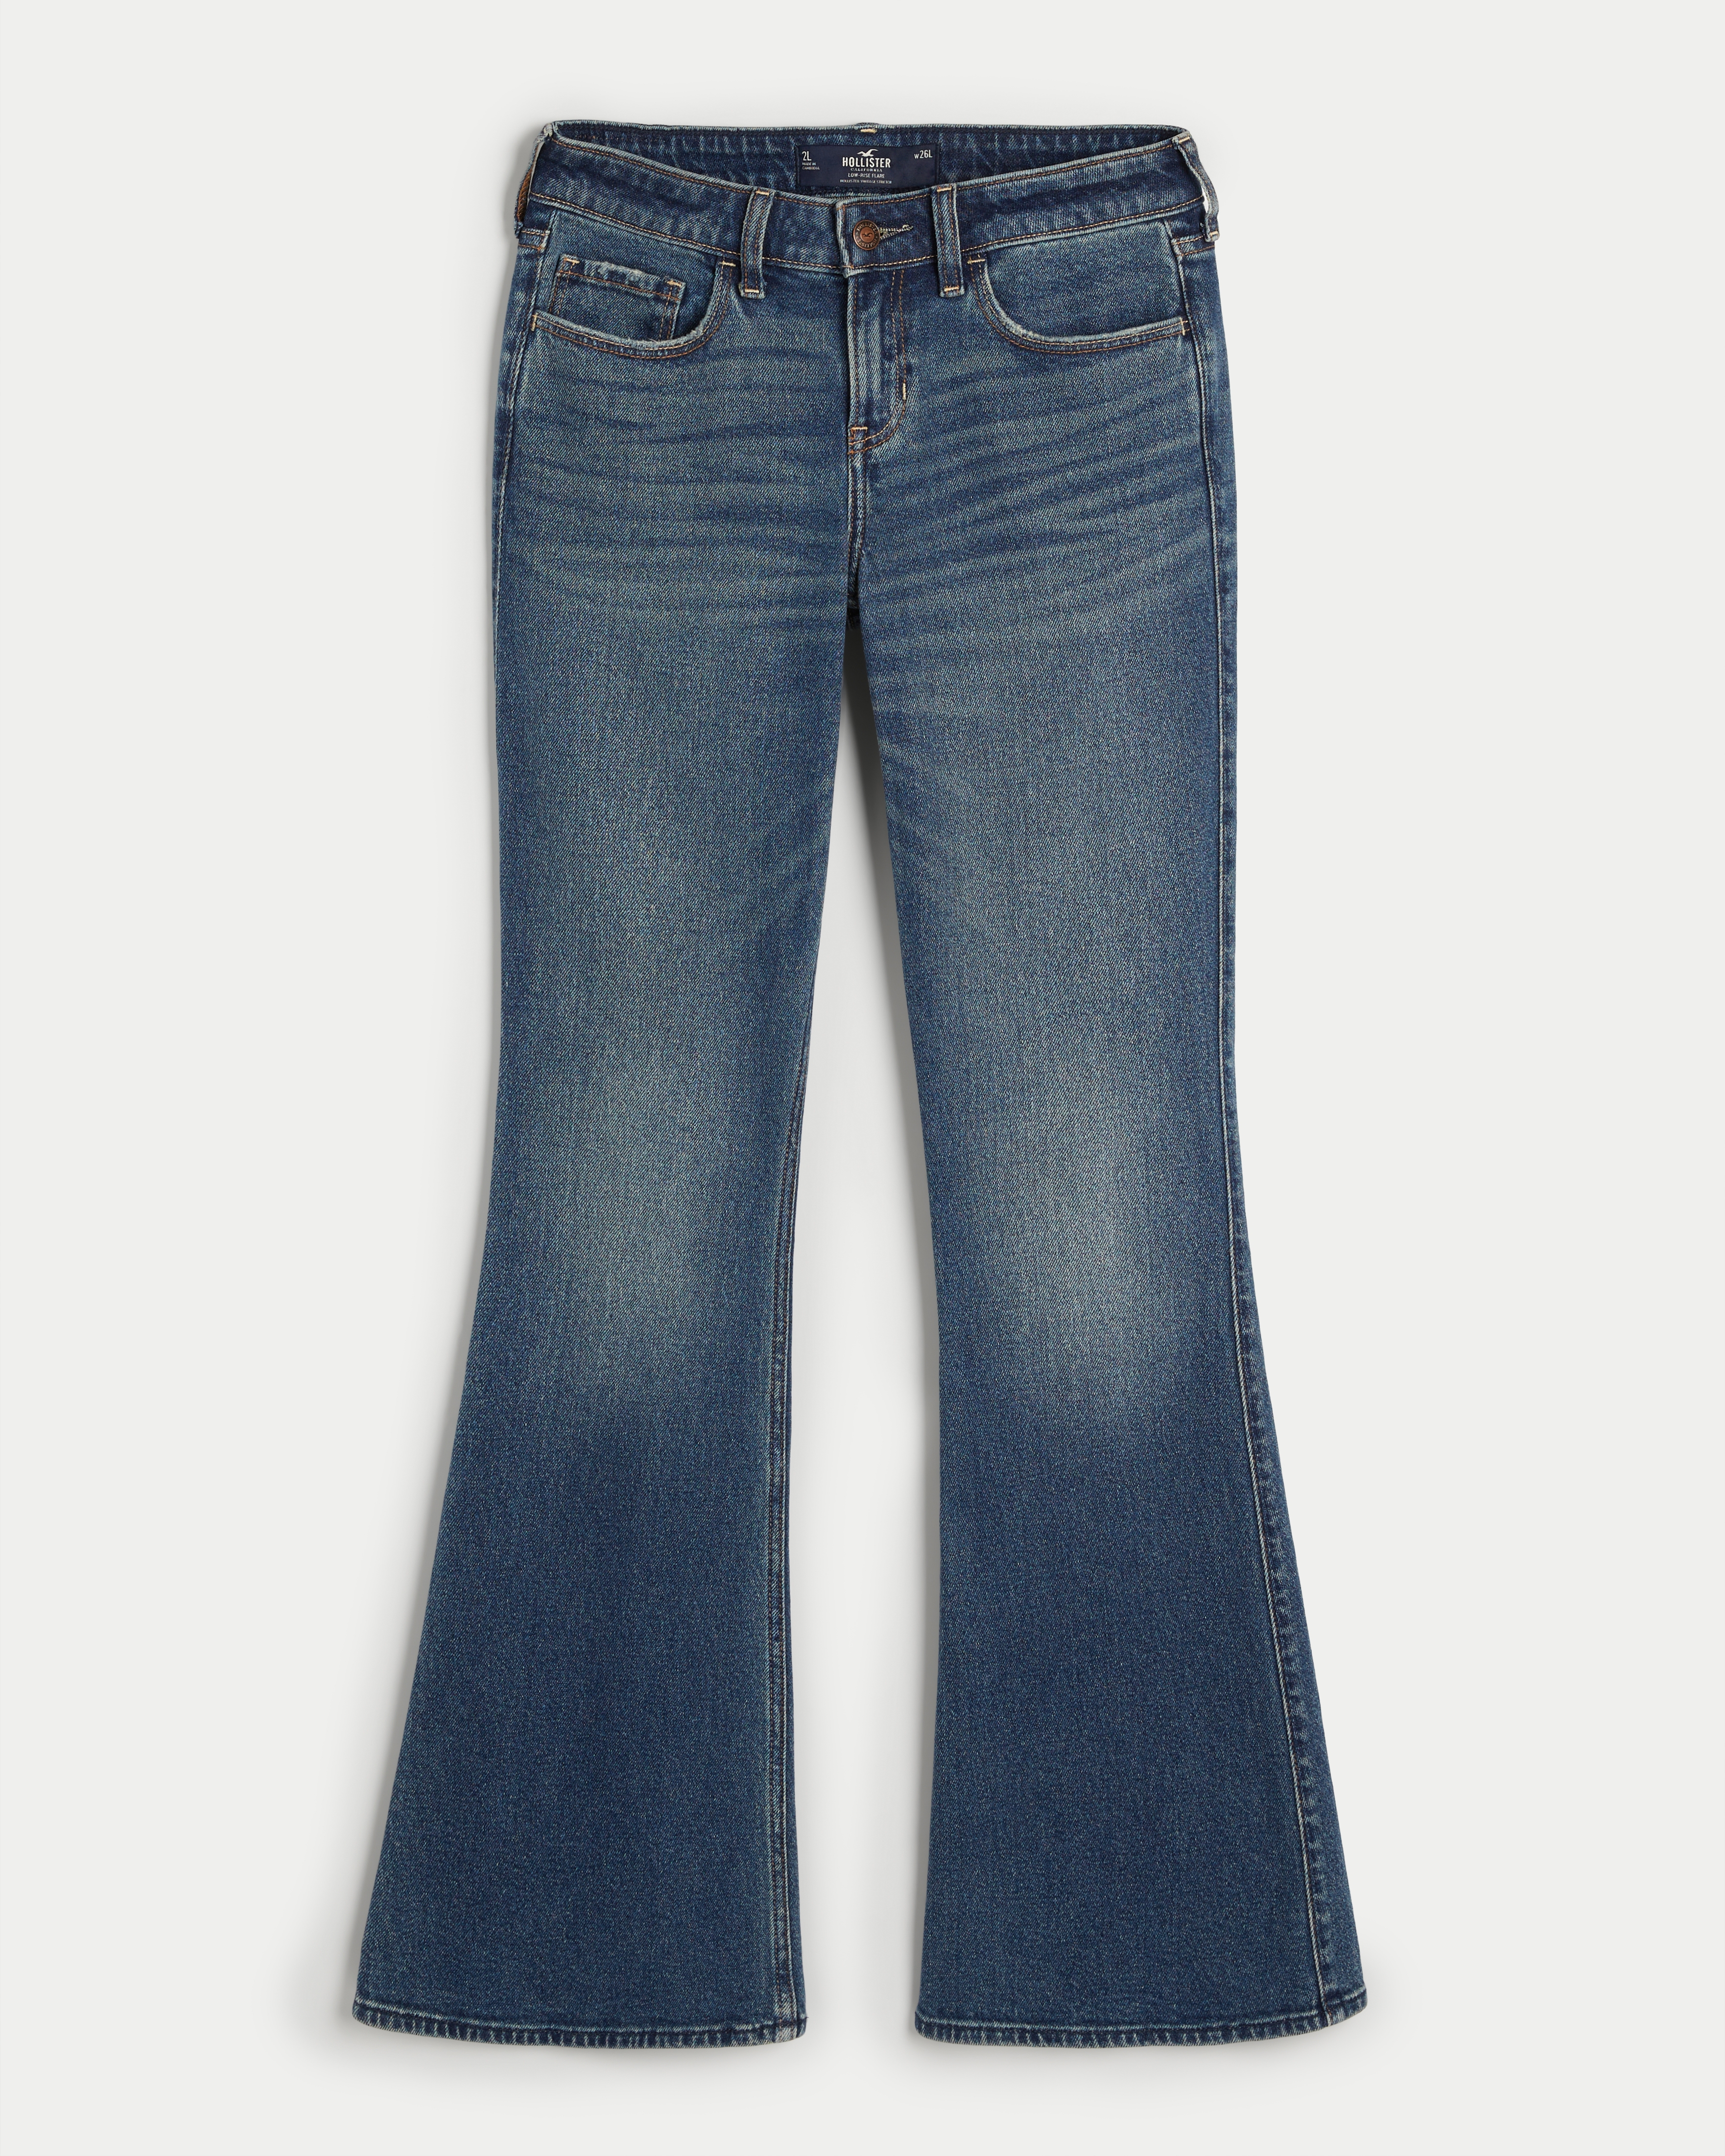 Low-Rise Dark Wash Flare Jeans